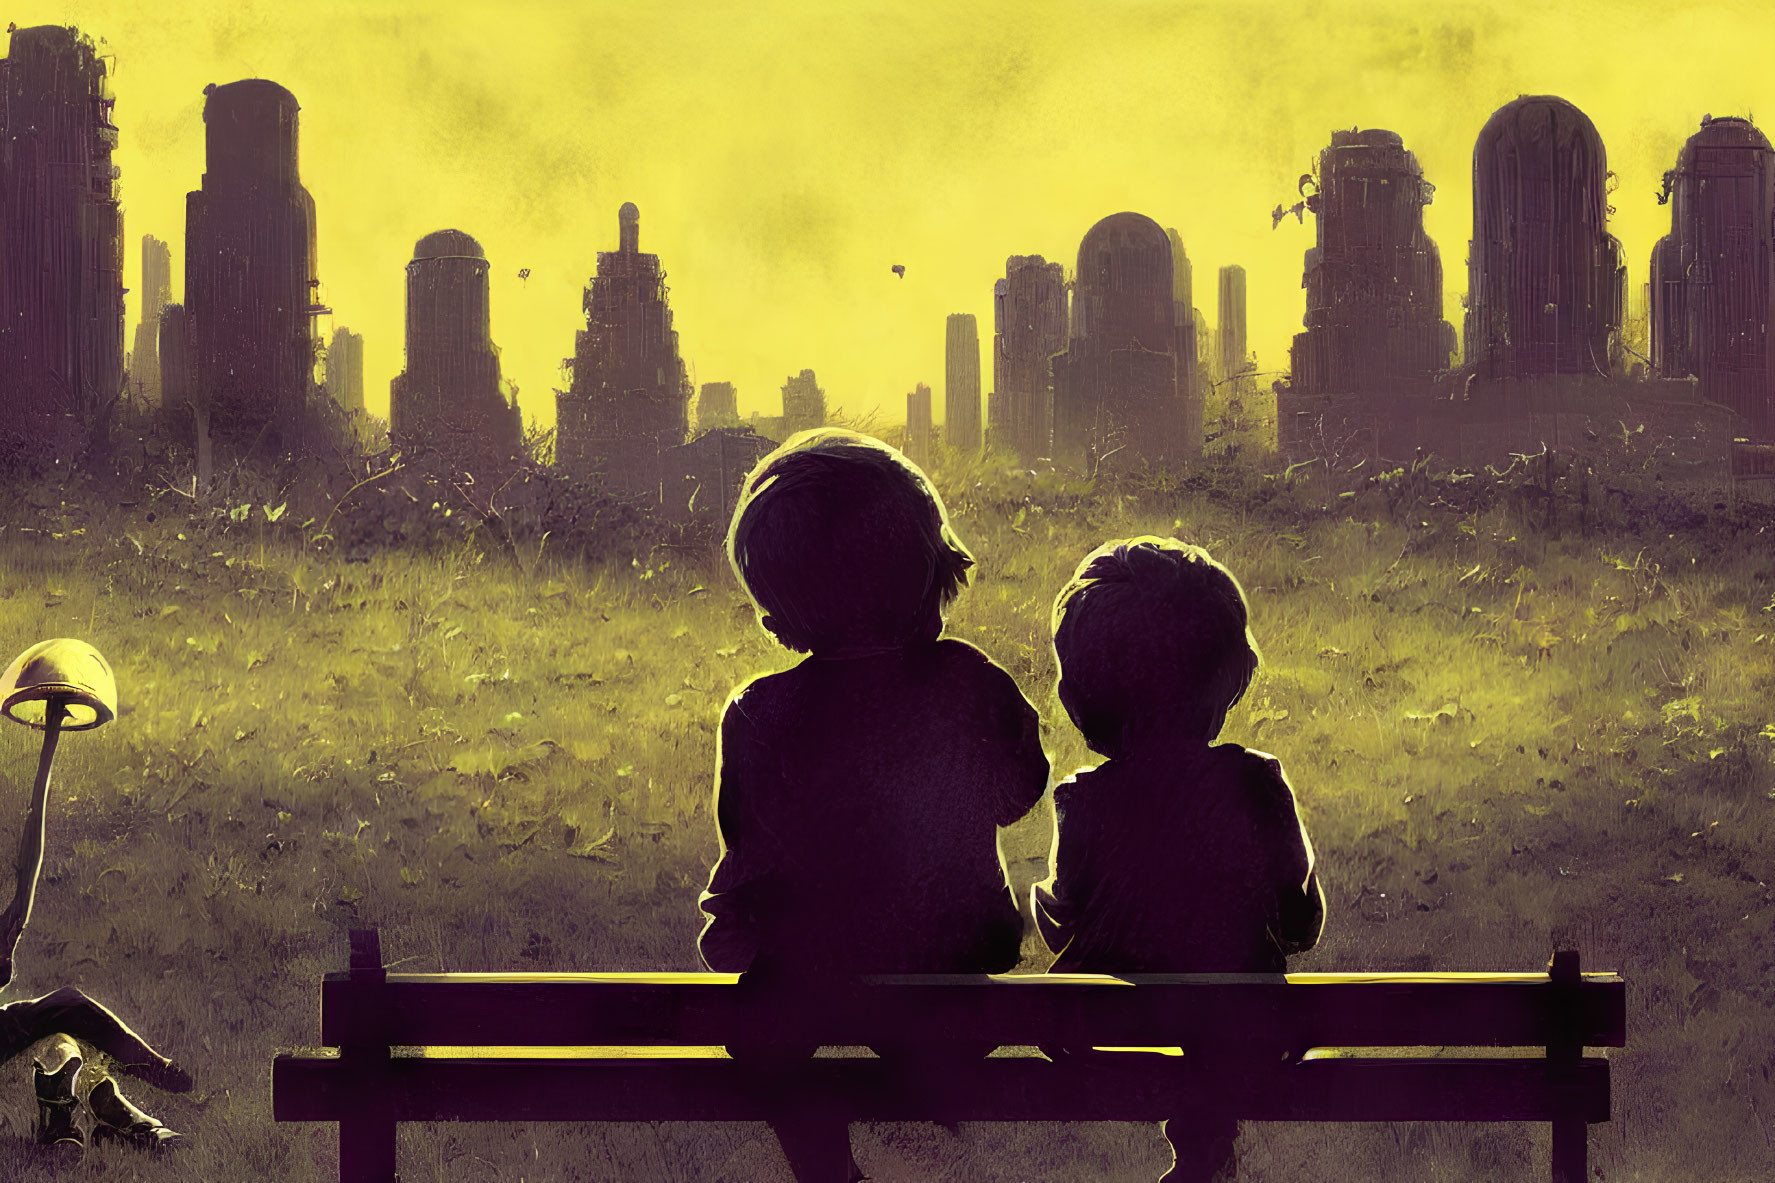 Silhouetted figures on bench in dystopian cityscape under yellow sky